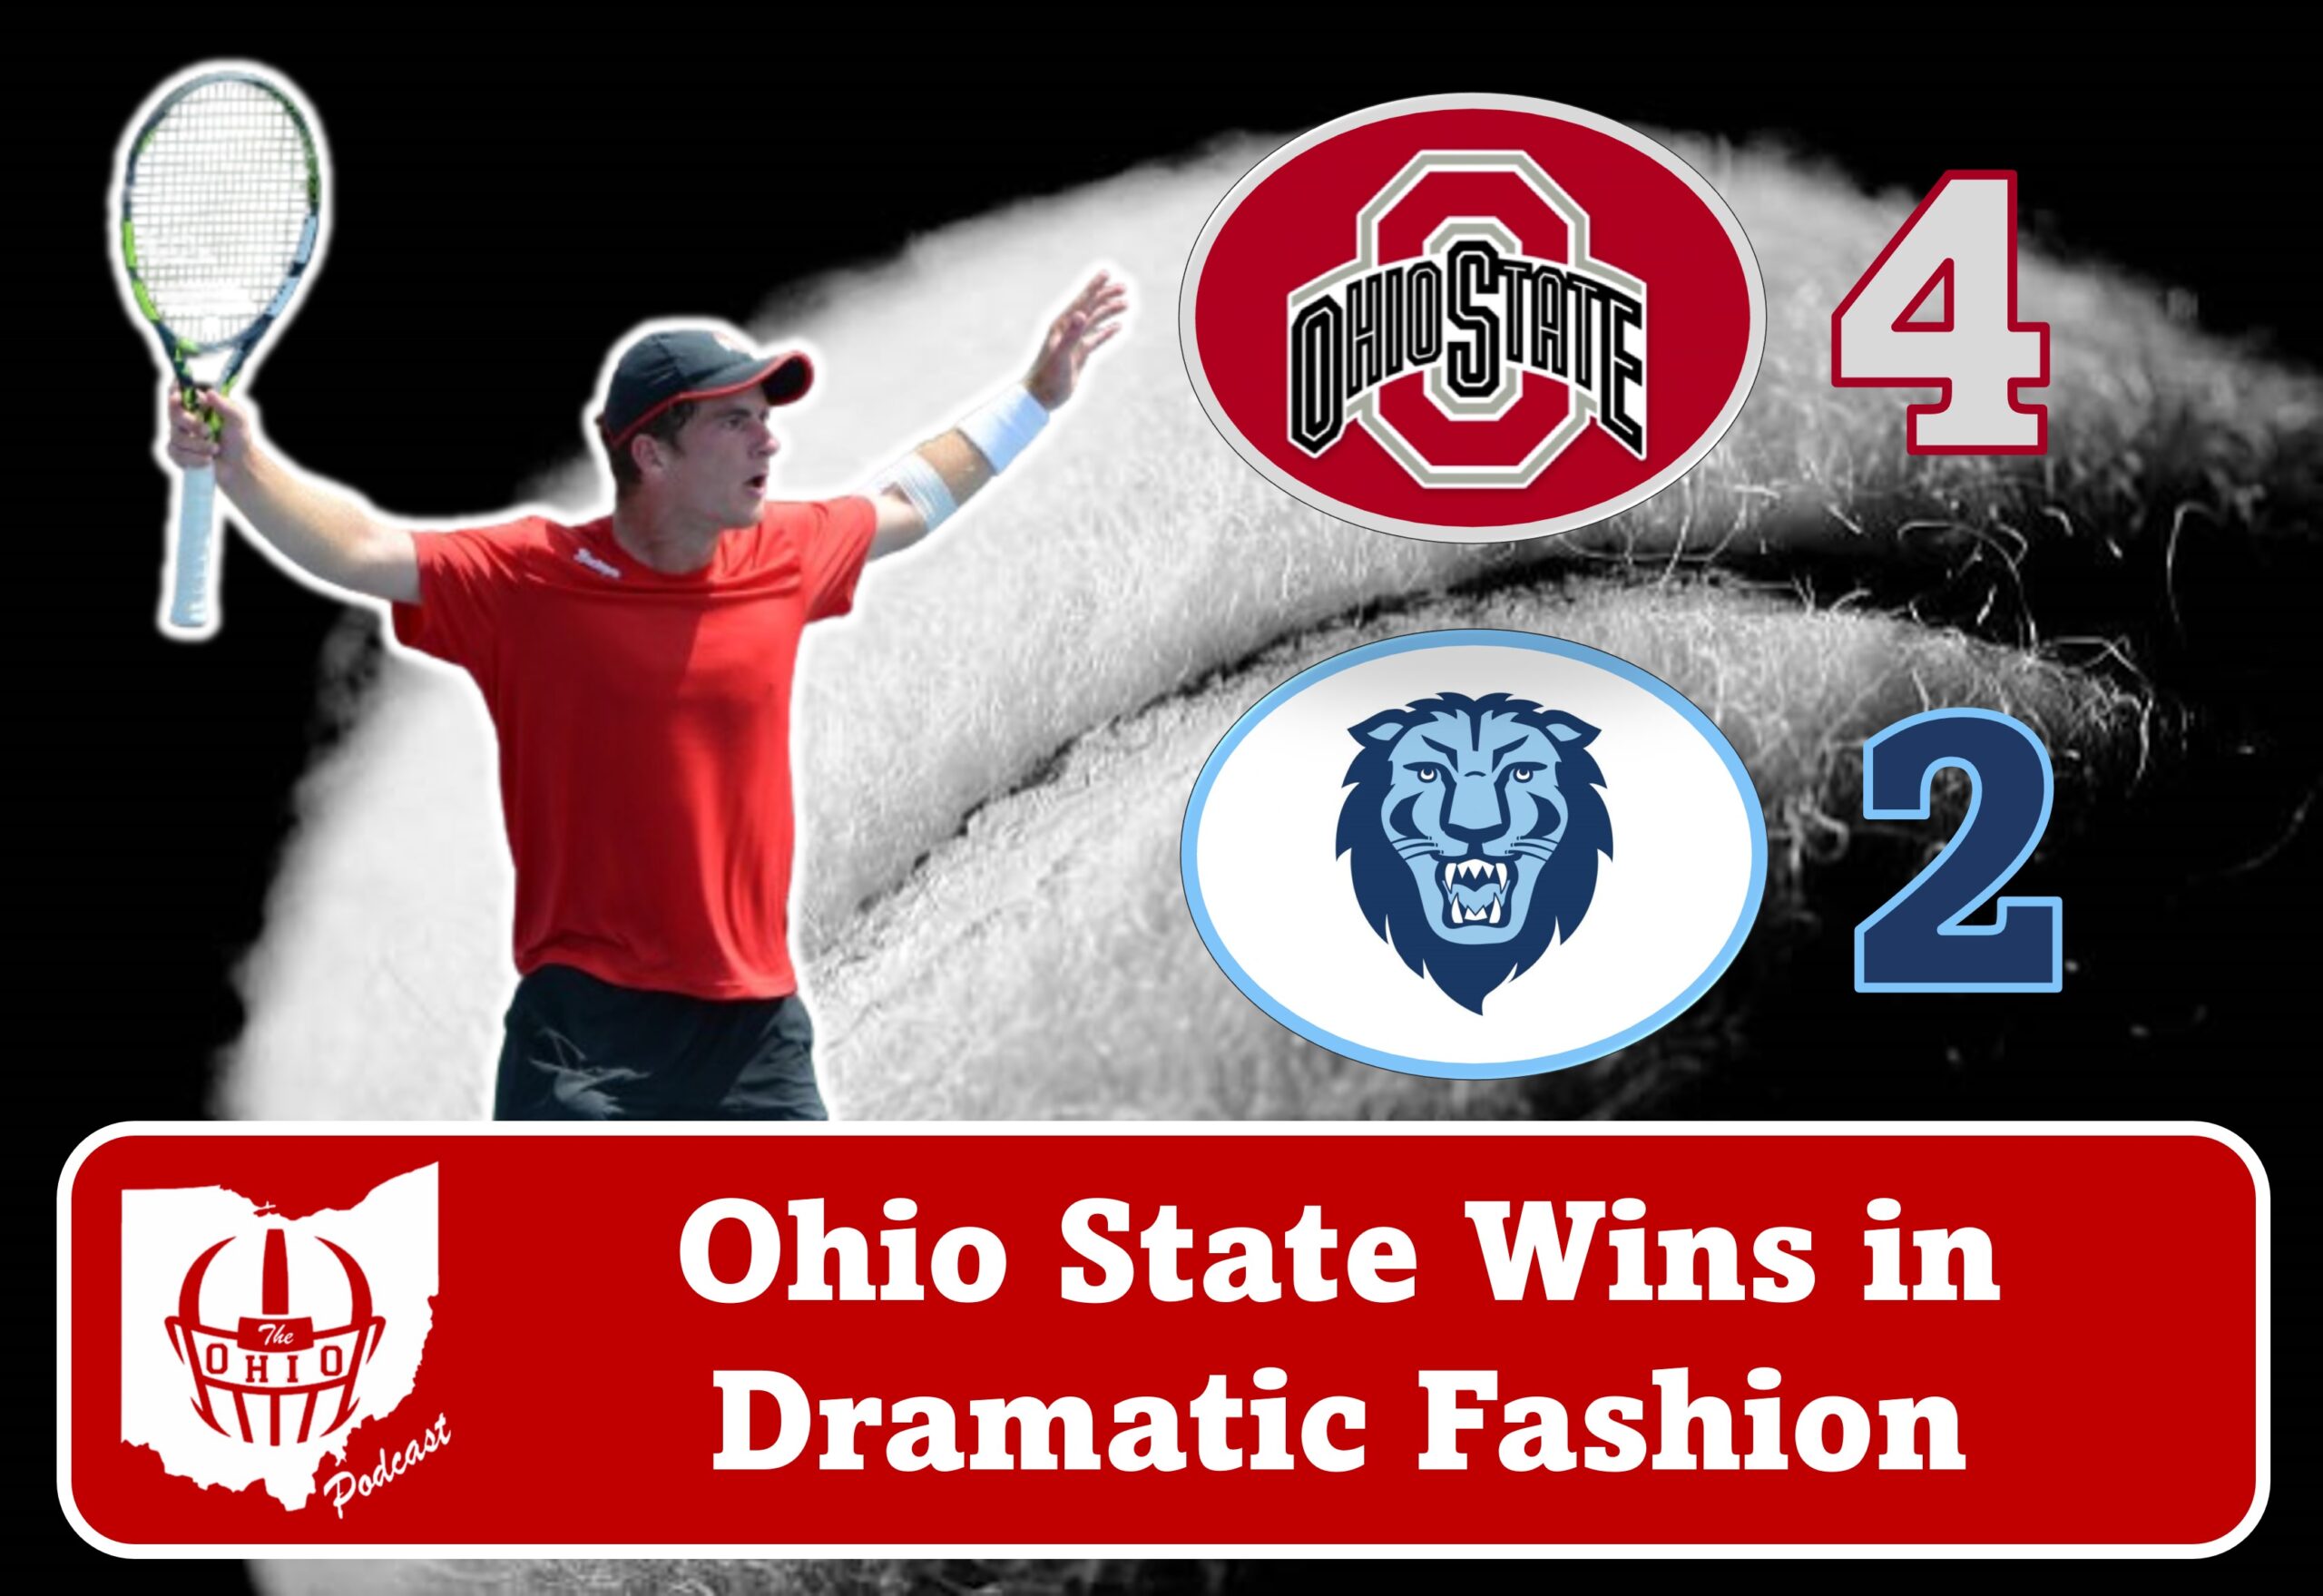 Ohio State Advances to NCAA Semifinals After Thrilling Match Against Columbia